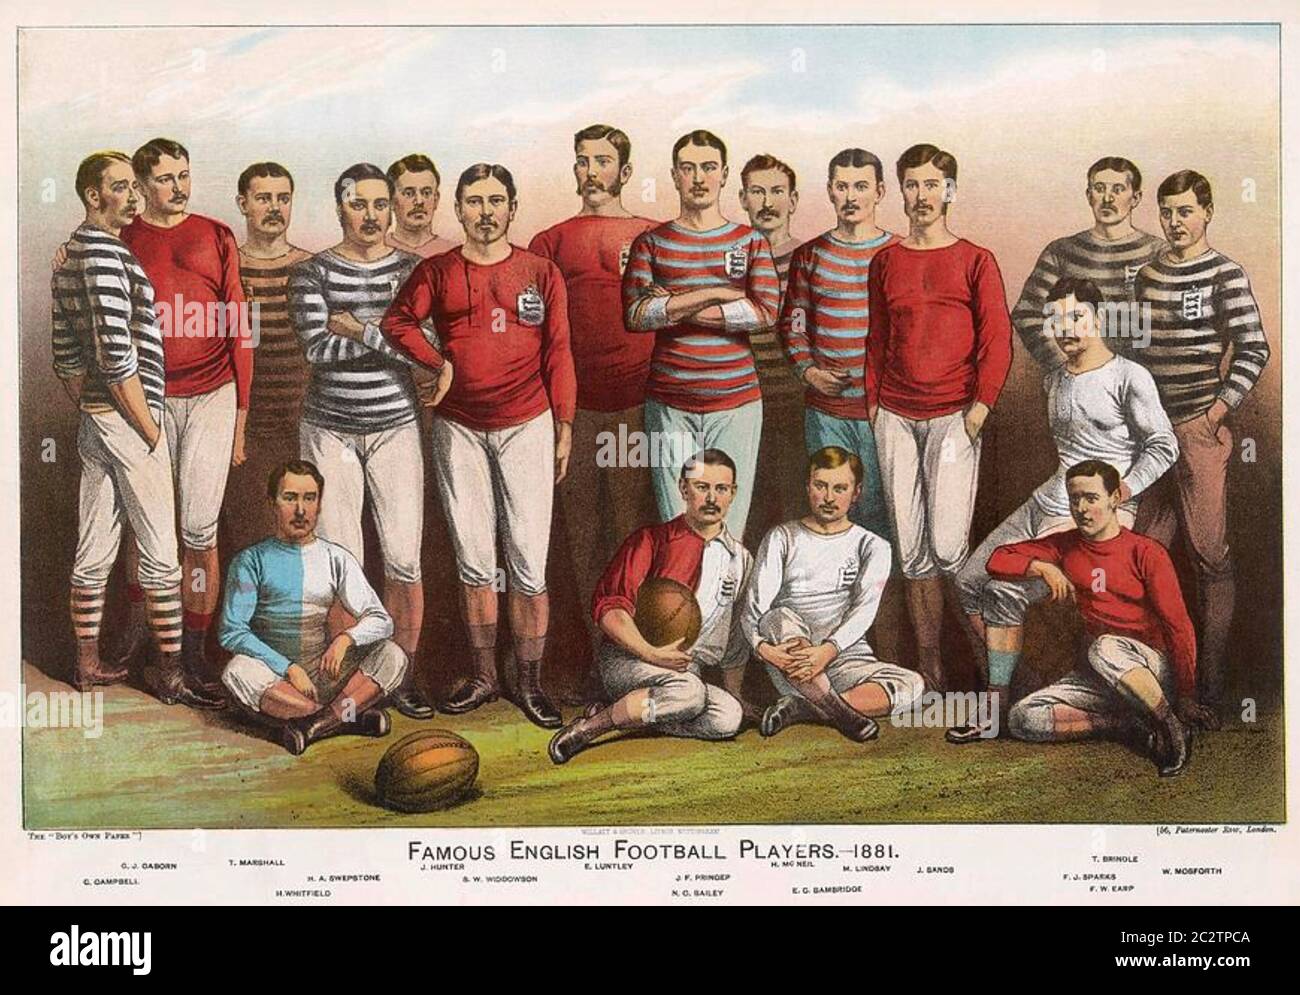 FAMOUS ENGLISH FOOTBALL PLAYERS in an 1881 illustration from the Boys Own Paper Stock Photo